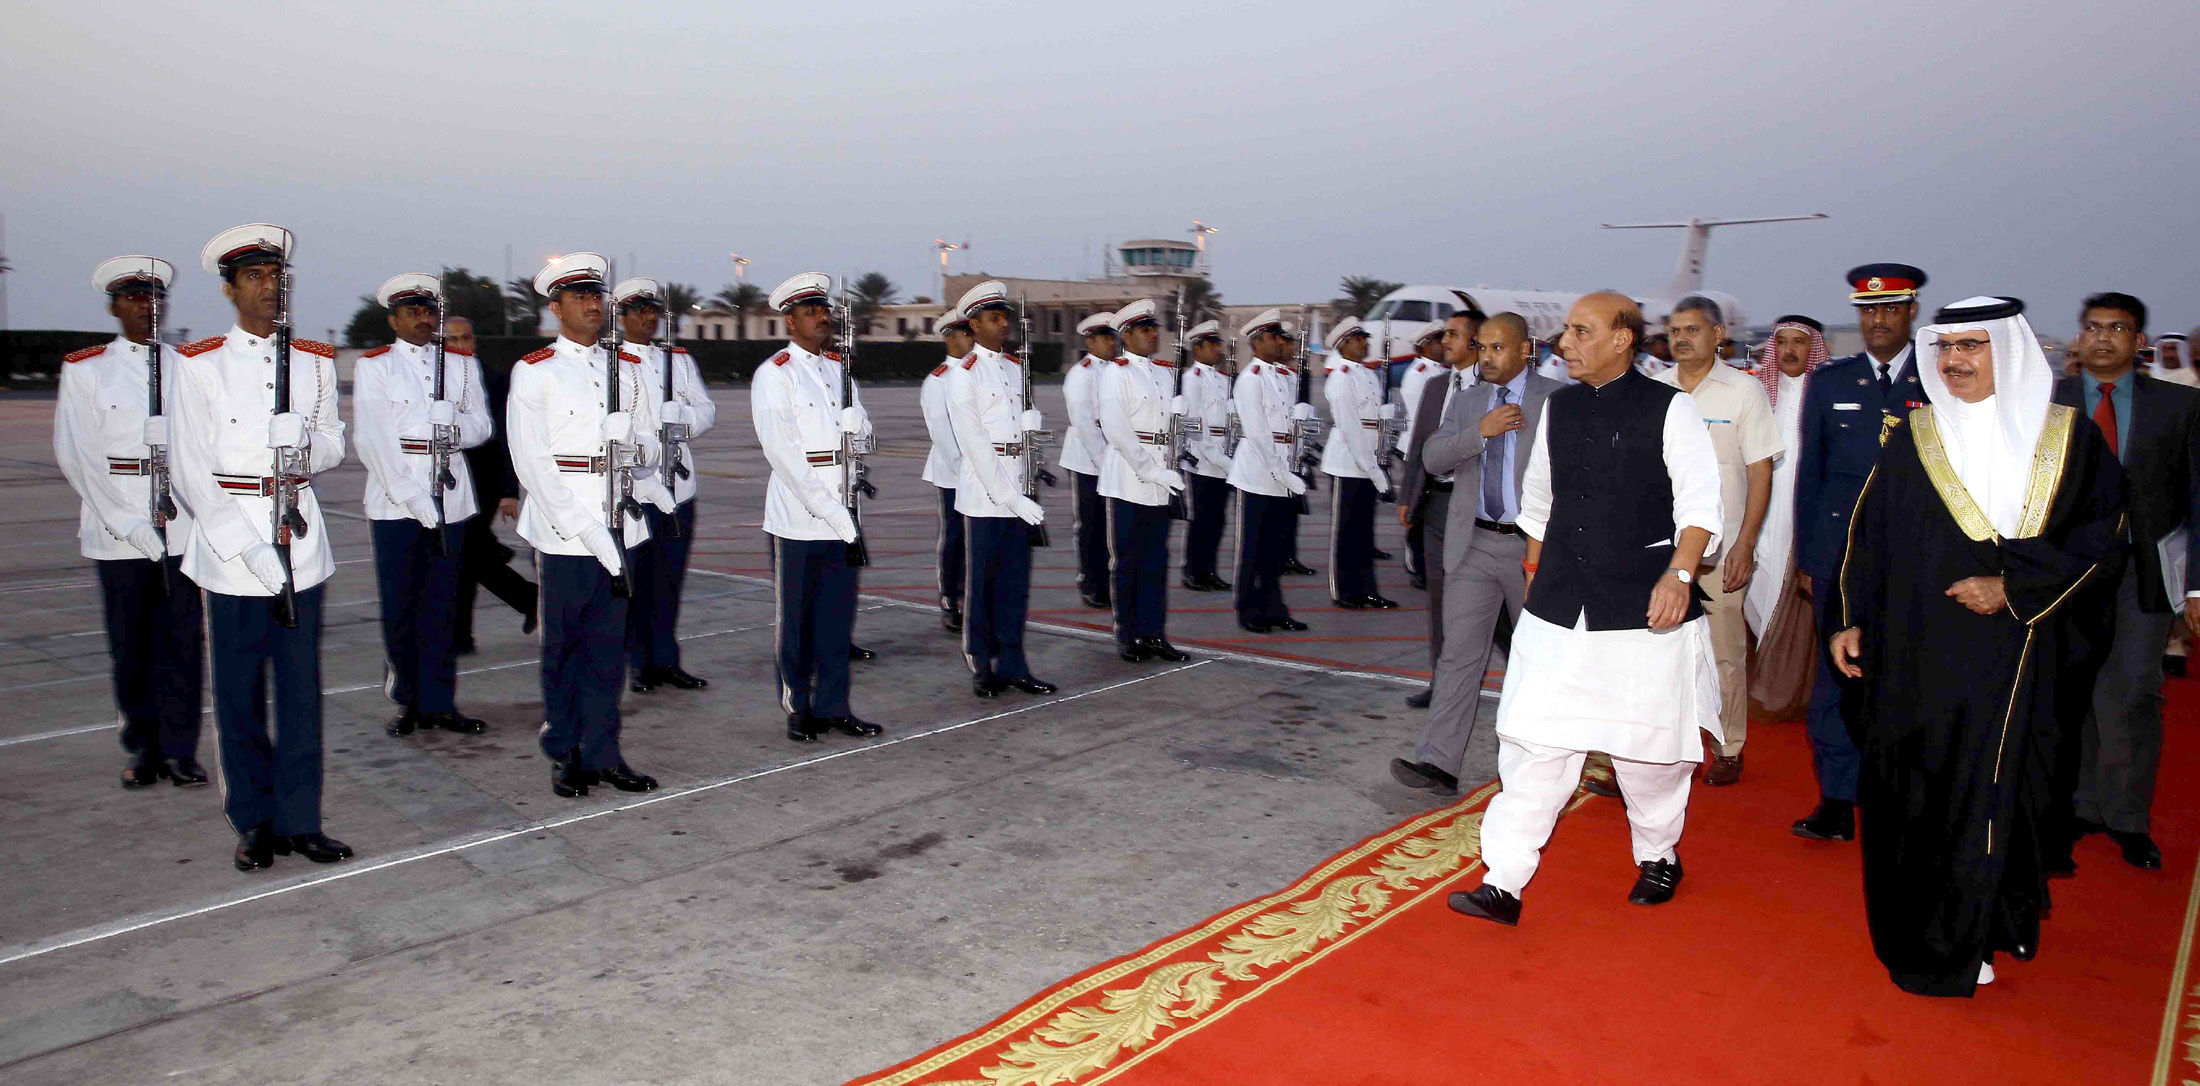 The Union Home Minister, Shri Rajnath Singh being presented a Guard of Honour, on his arrival, in Manama on October 23, 2016.  	The Minister of Interior of Bahrain, Lt. Gen. Sheikh Rashid Bin Abdulla Al Khalifa is also seen.